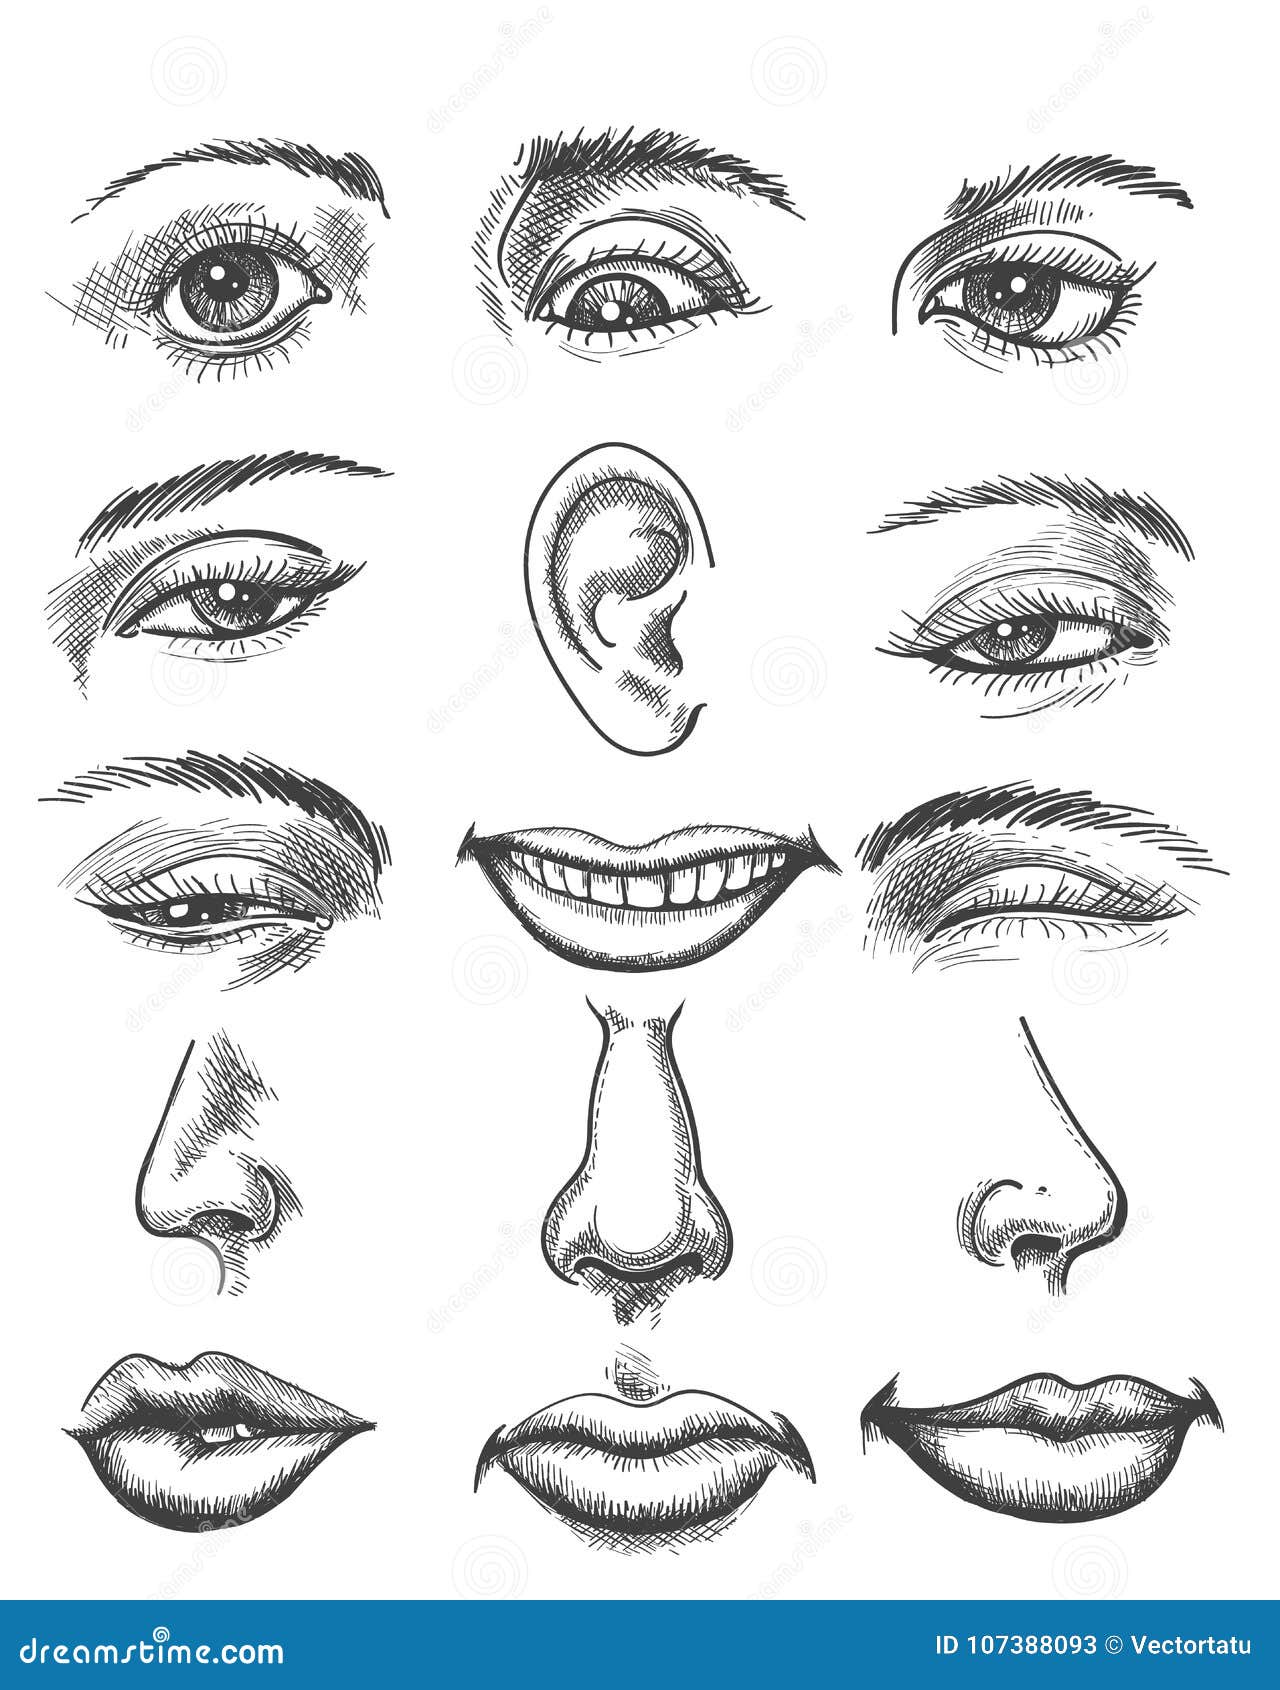 How to Draw a Nose - Easy Drawing Art